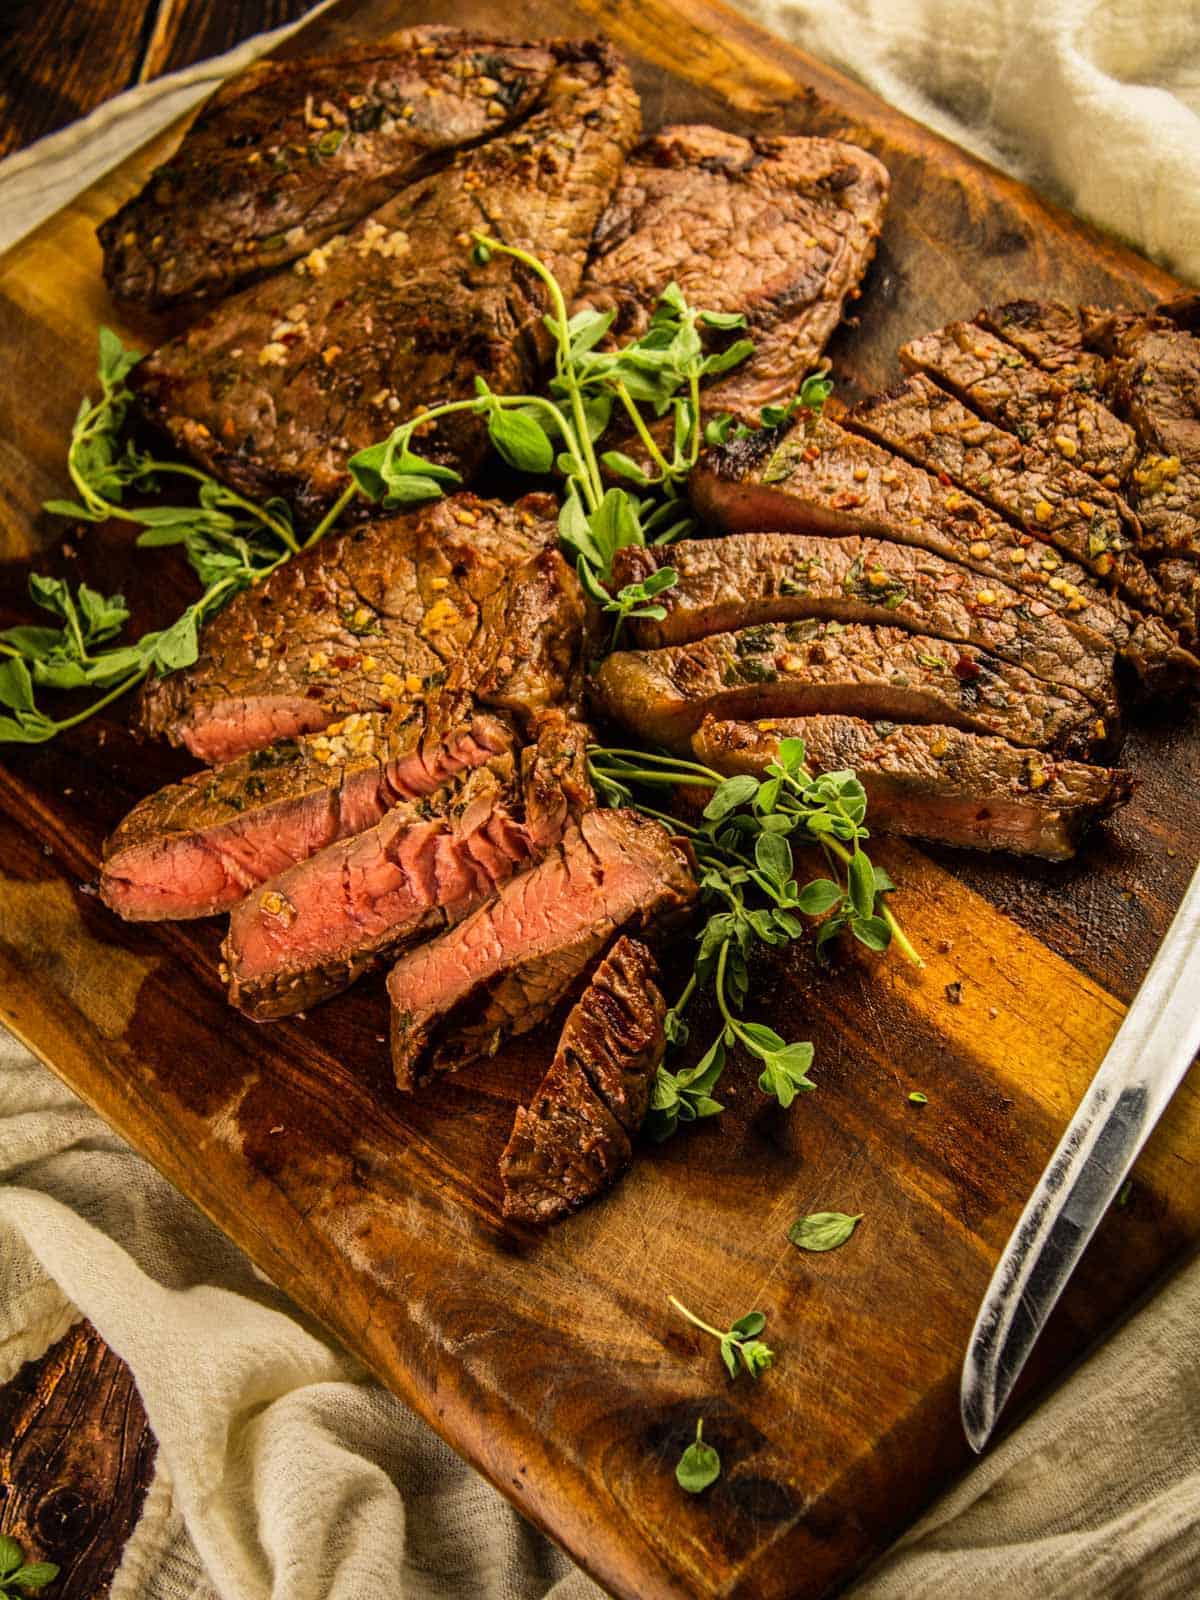 grilled steak sliced on a cutting board with fresh oregano and a knife.